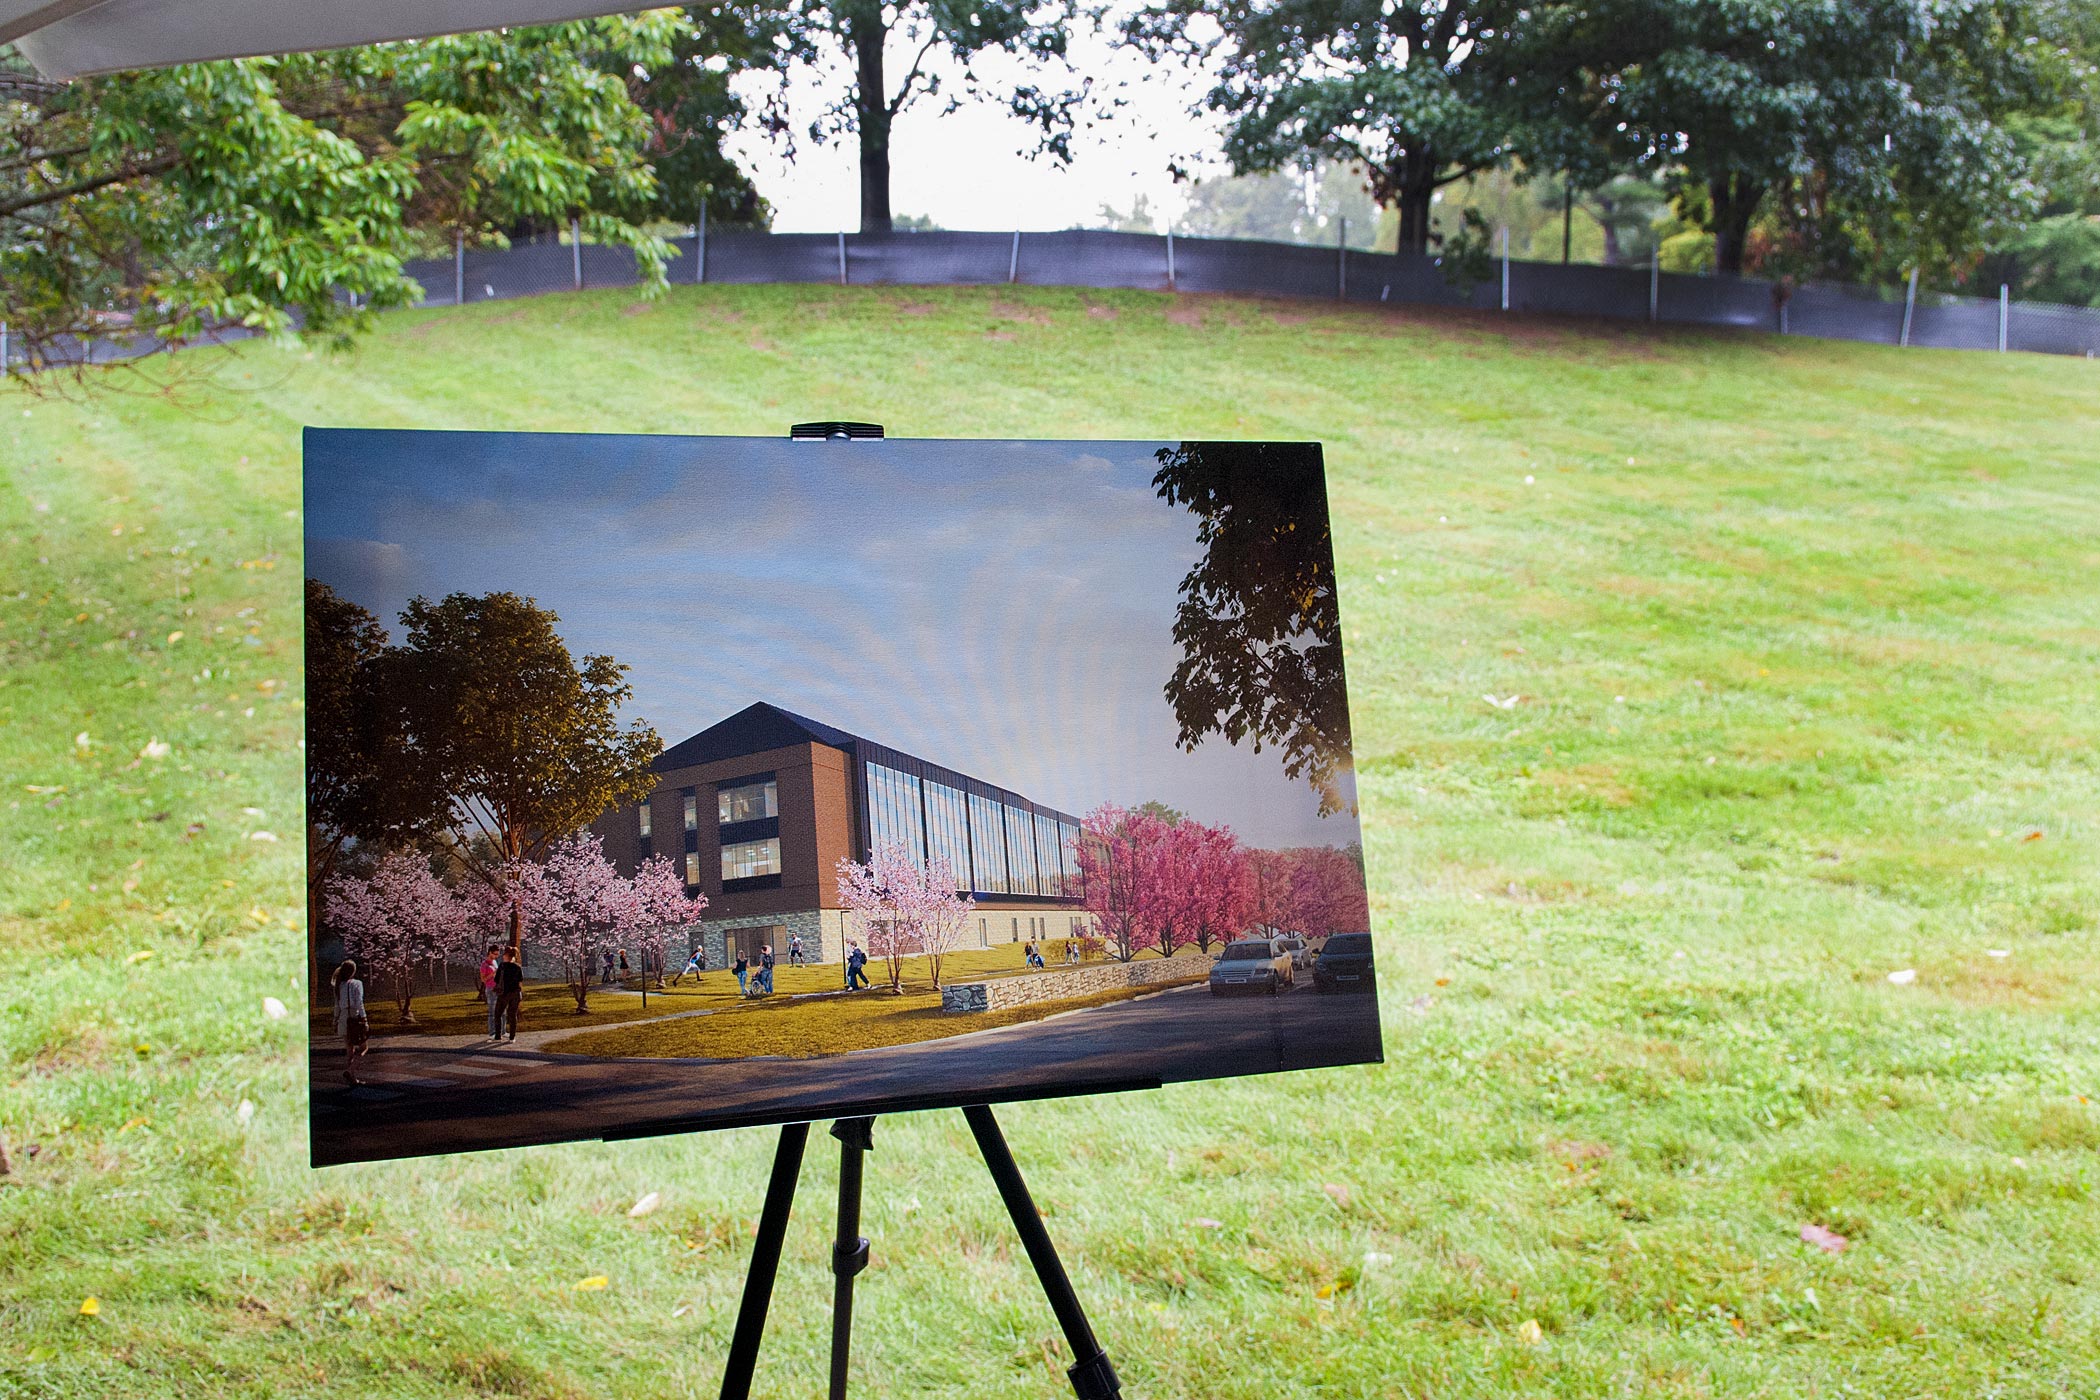 Digital drawing of the new Ivy Mountain orthopedic facility sits on an easel in a field